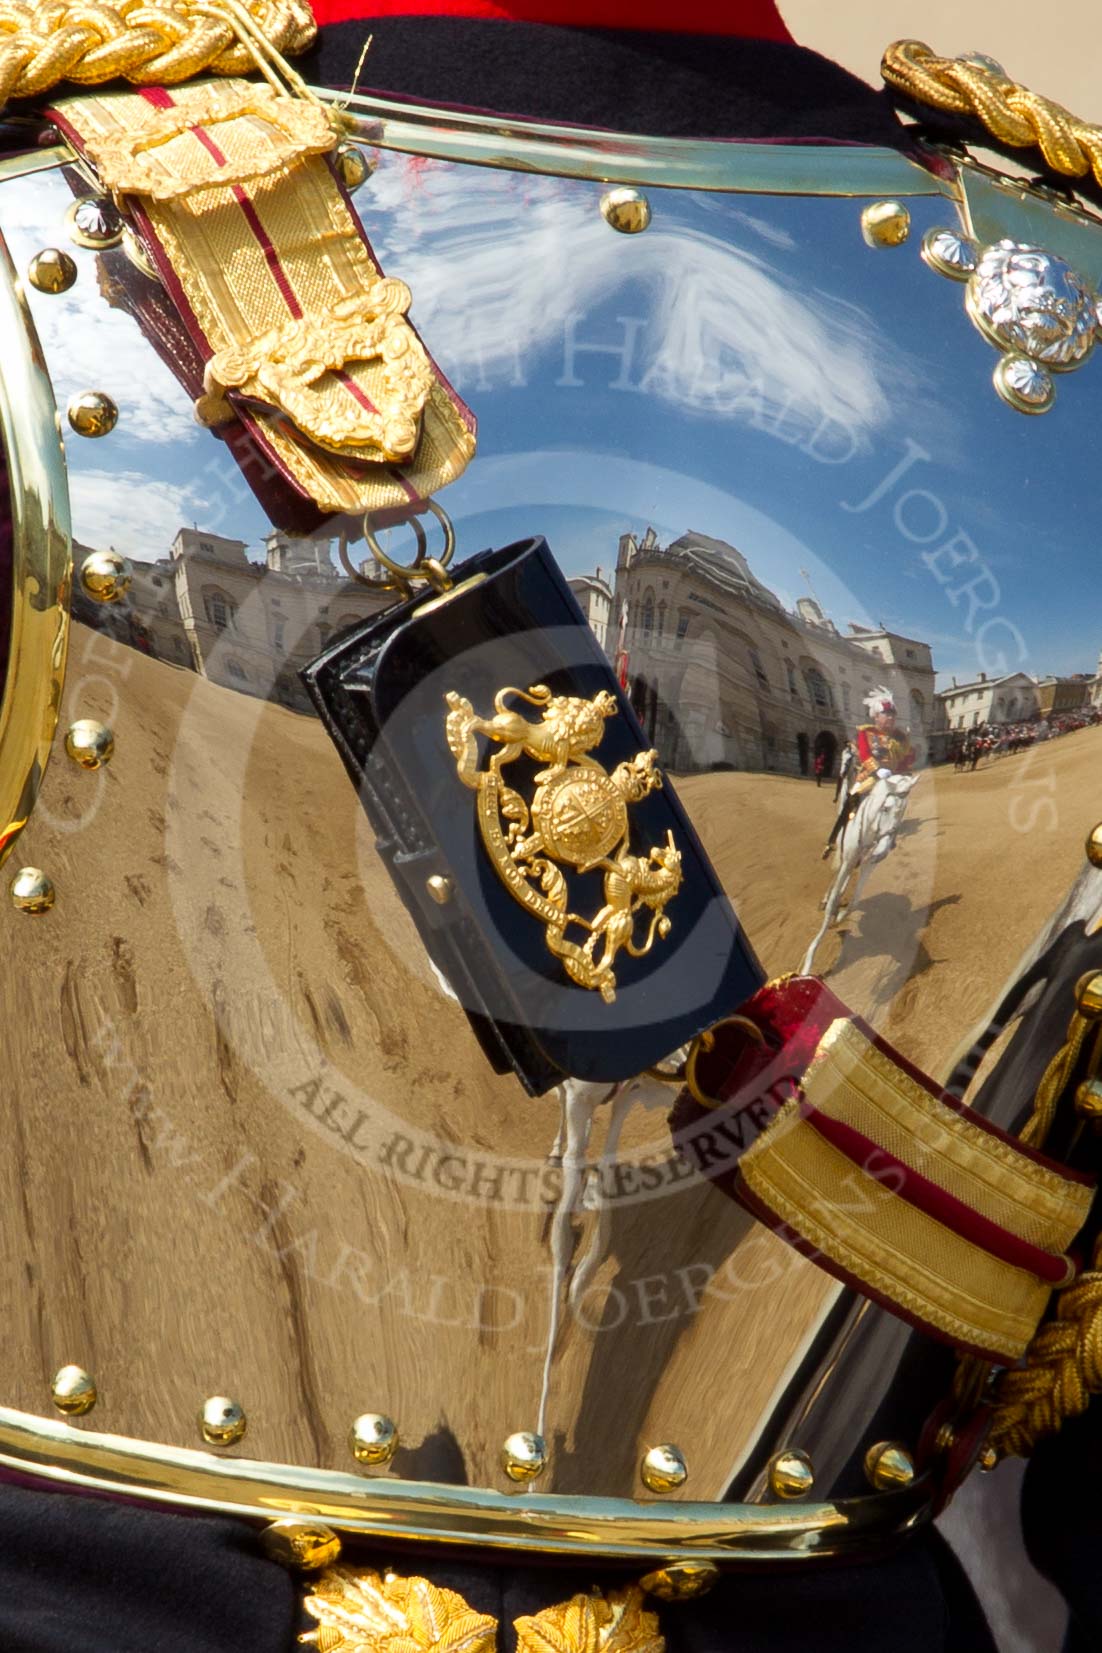 The Colonel's Review 2011: The read shield of Major Twumasi-Ankrah, Blues and Royals, standing in for the Princess Royal, reflecting Horse Guards Building and the following members of the Royal Procession..
Horse Guards Parade, Westminster,
London SW1,

United Kingdom,
on 04 June 2011 at 11:01, image #90